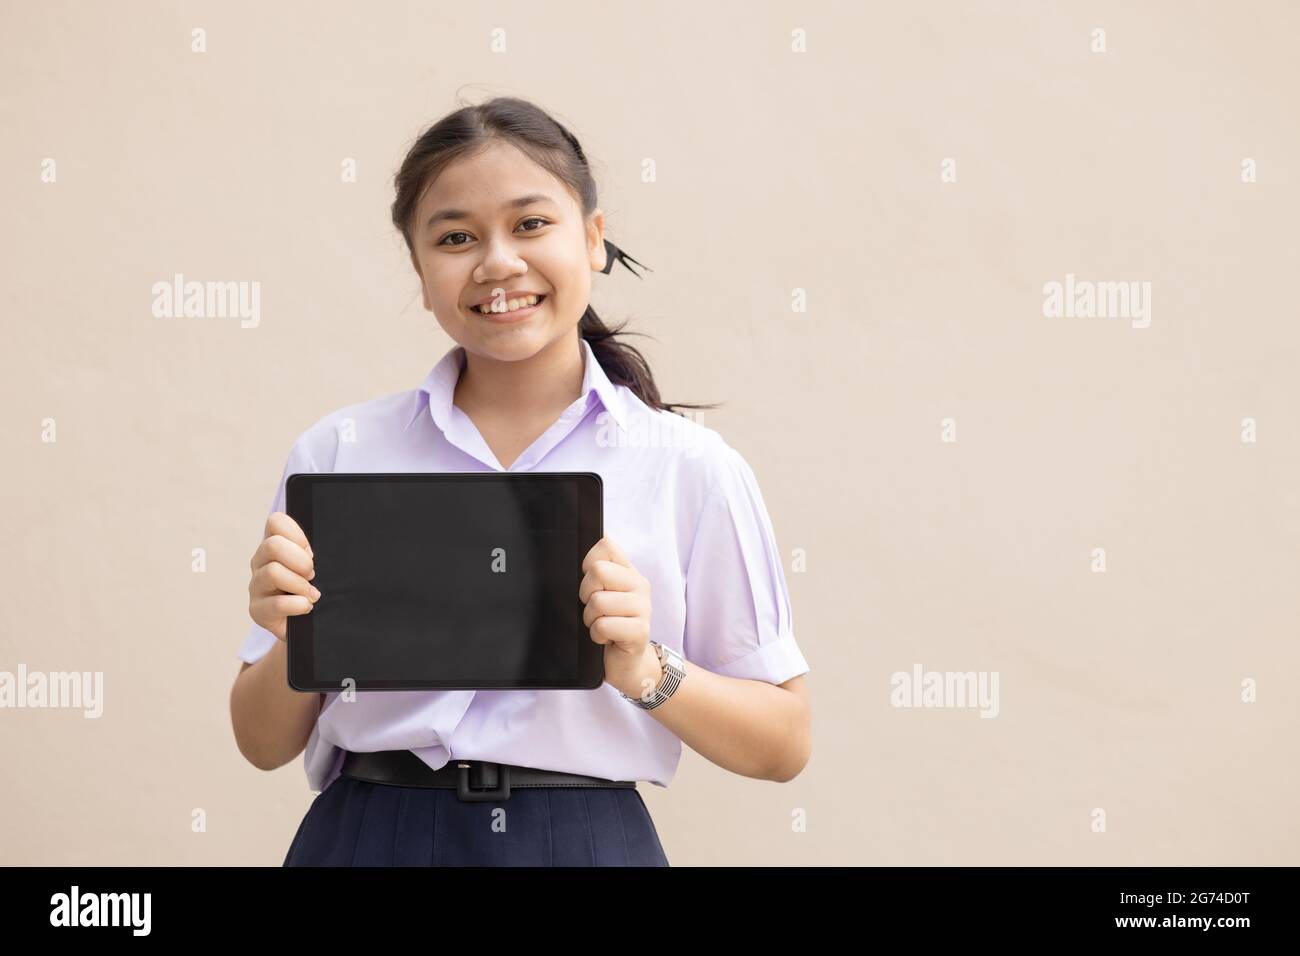 Asian girl teen student hand hold tablet blank screen space for advertising text in school uniform happy smile isolated. Stock Photo